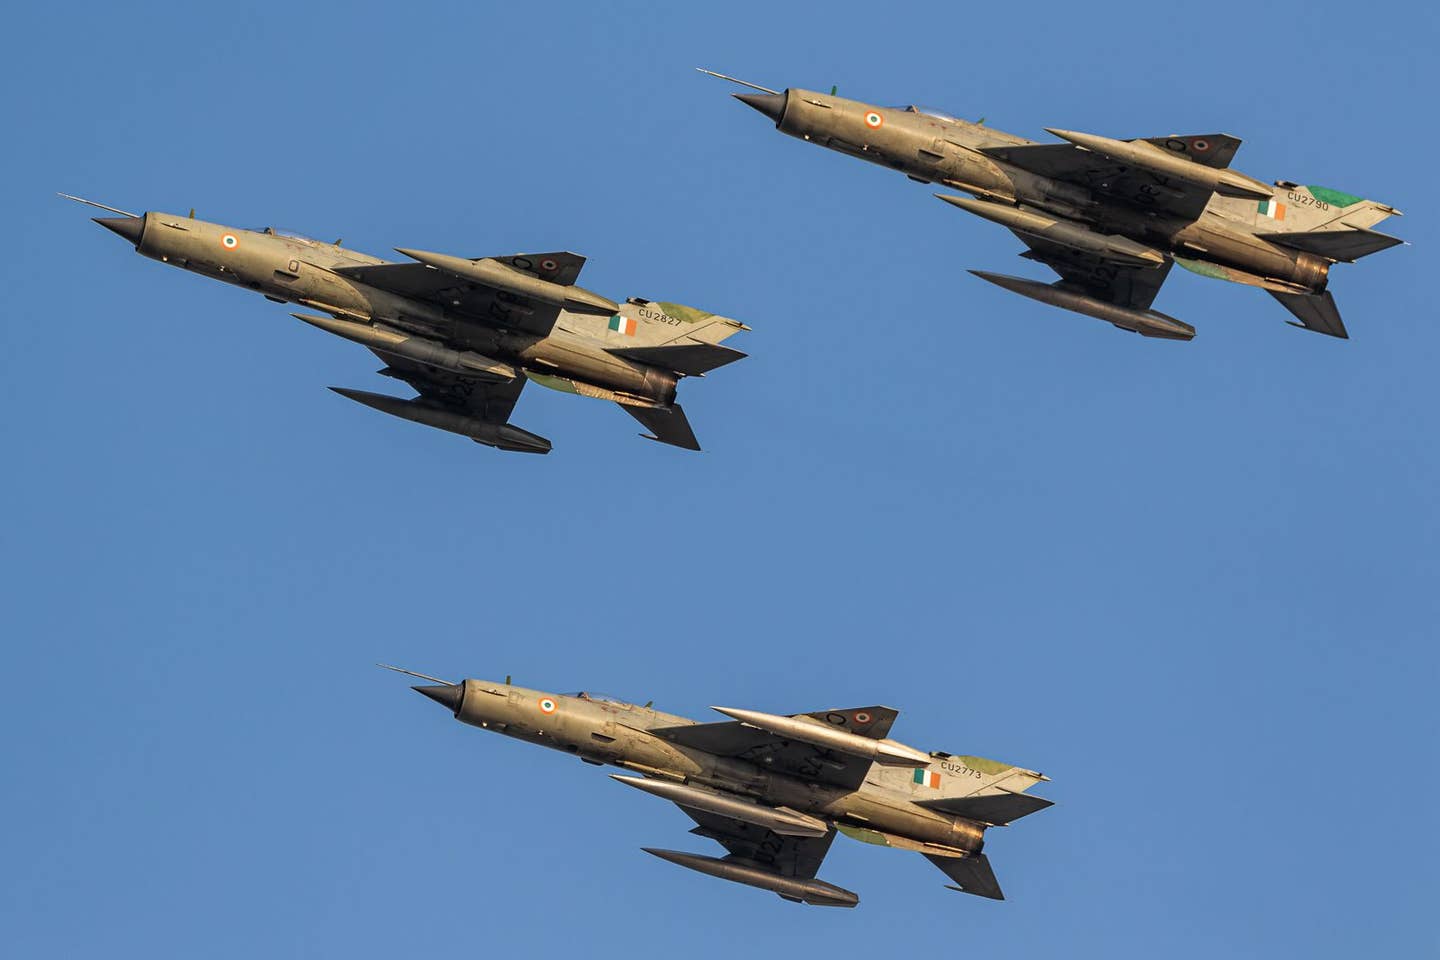 The three MiG-21 Bison jets involved in the flypast marking the 91st anniversary of the Indian Air Force yesterday in the Sangam area of Prayagraj, Uttar Pradesh. <em>Angad Singh</em>